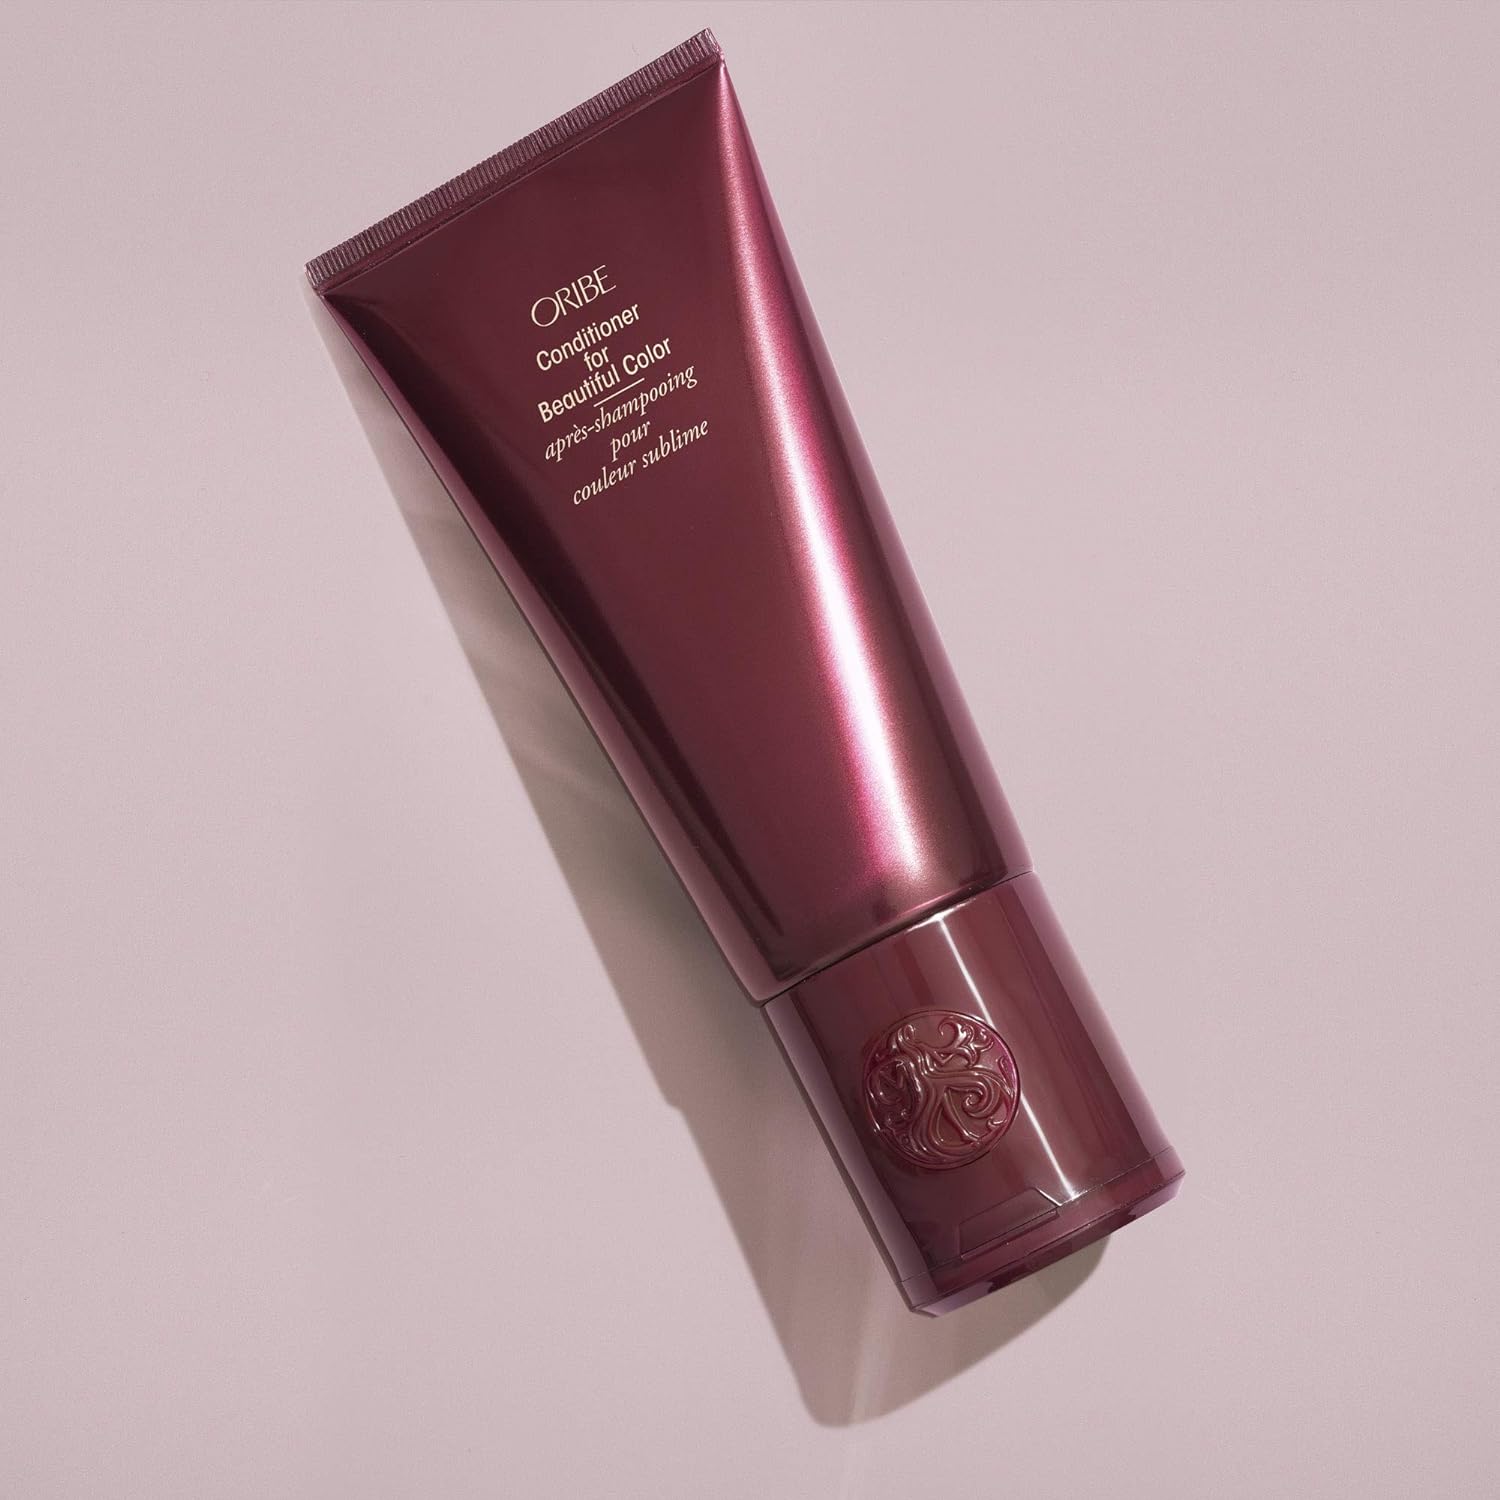 Buy ORIBE Shampoo and Conditioner for Beautiful Color Bundle on Amazon.com ? FREE SHIPPING on qualified orders